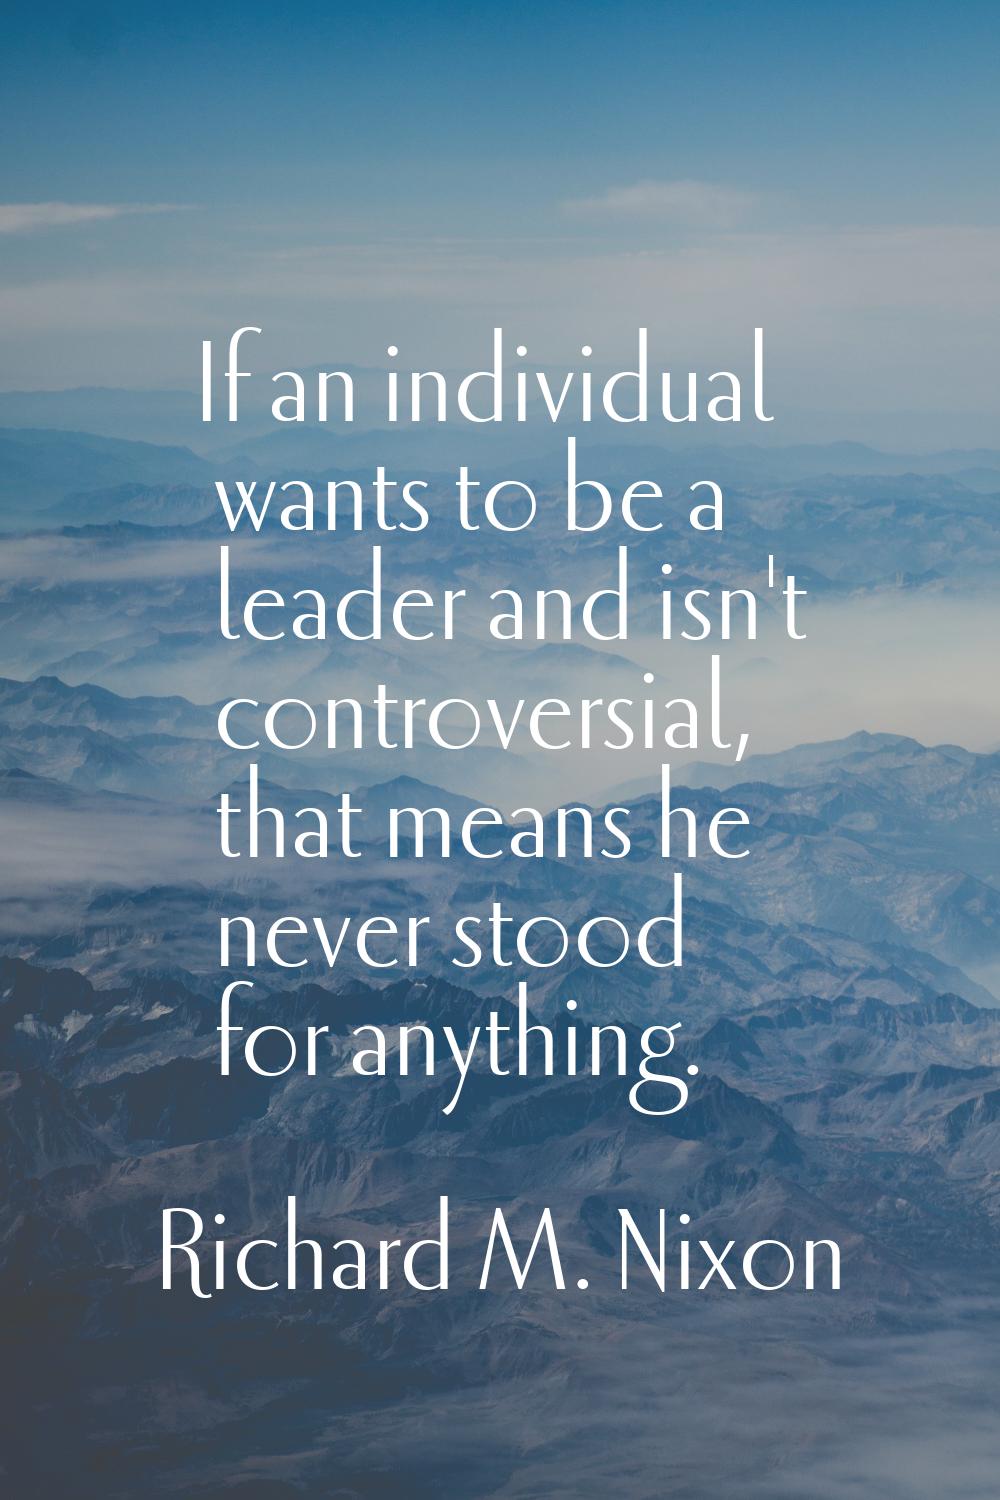 If an individual wants to be a leader and isn't controversial, that means he never stood for anythi